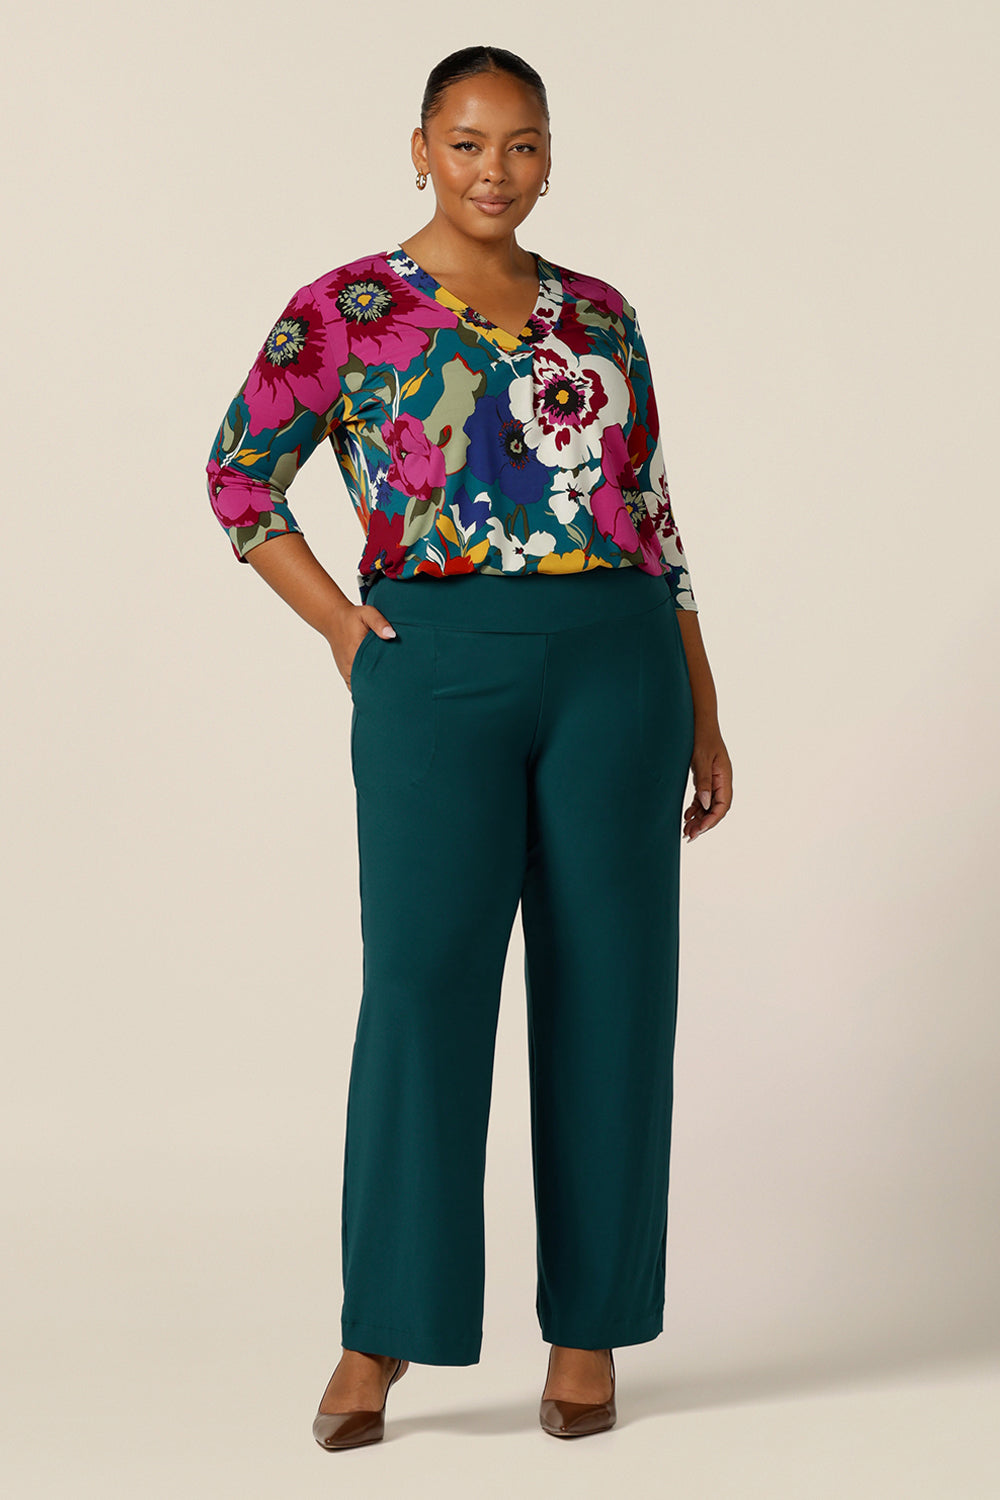 A size 18, plus size woman wears a jersey, V-neck top with 3/4 sleeves. A tailored top for work and corporate wear, the floral print top is tucked in to wide-leg trousers as a workwear outfit.